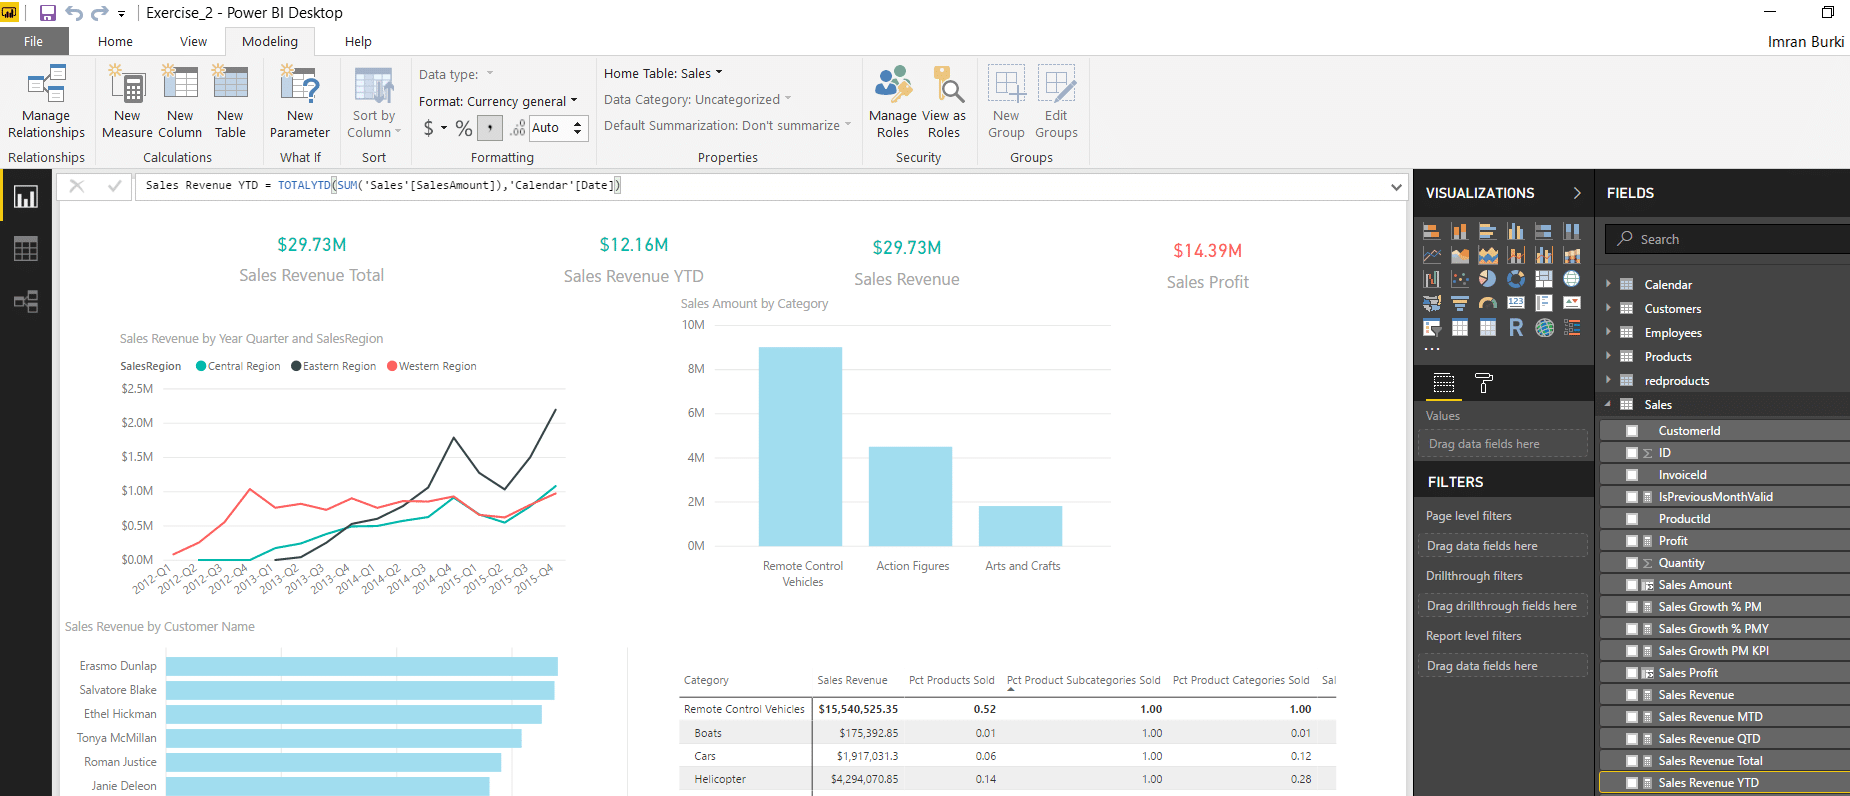 How to use time intelligence in power bi using dax